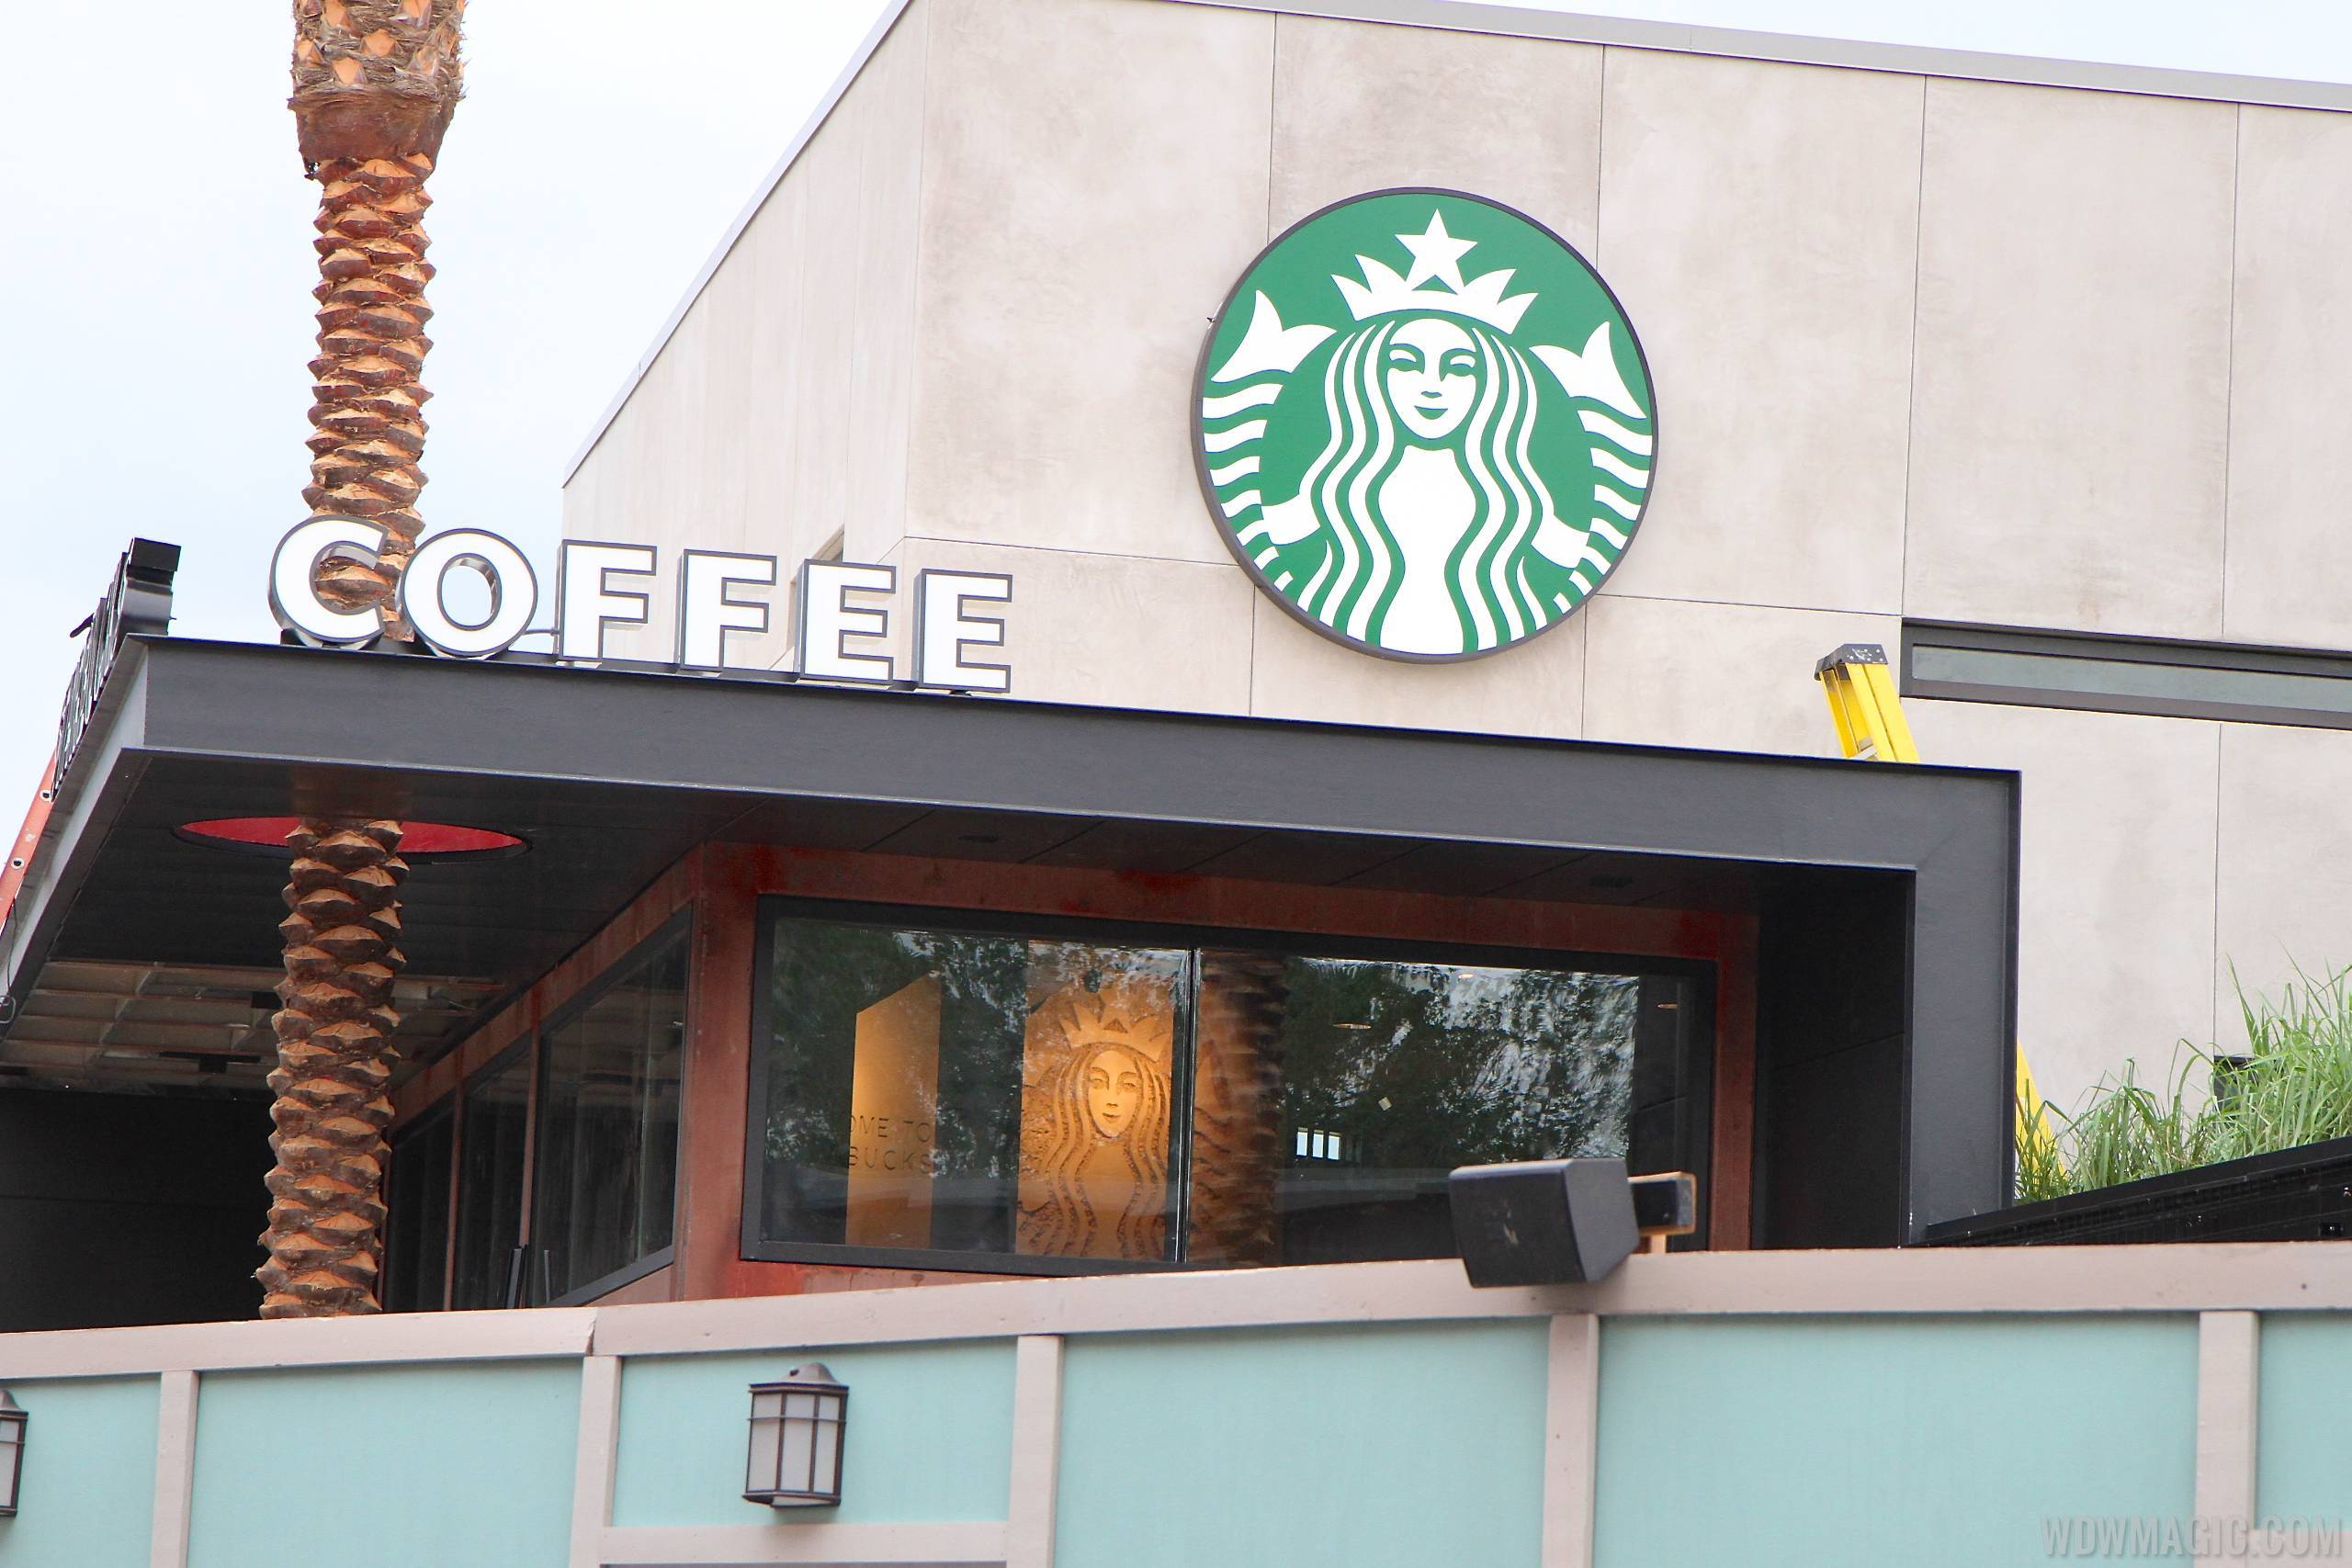 PHOTOS - Signs up as Starbucks West Side nears opening